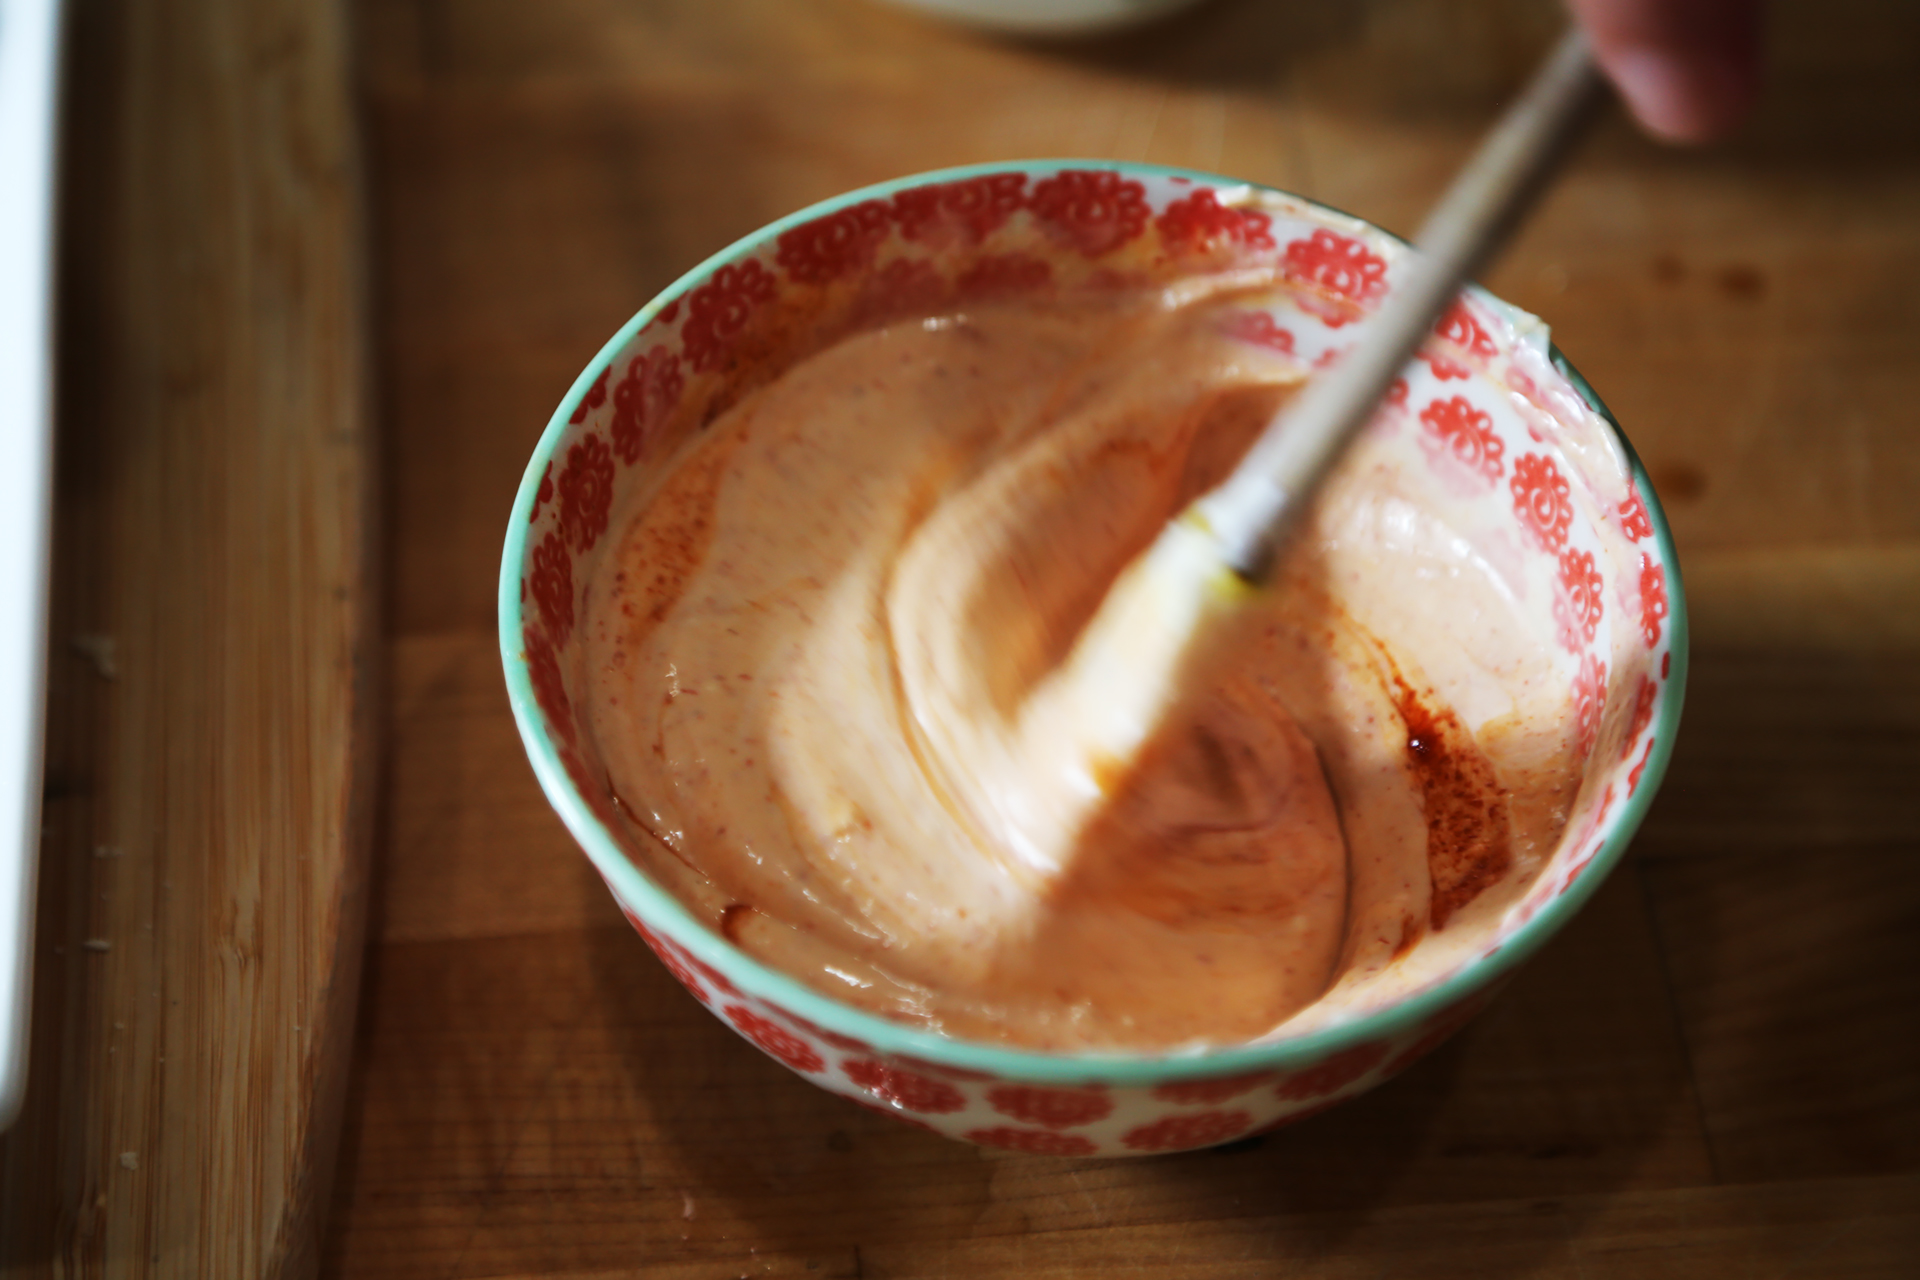 To make the spicy mayo, stir together all the ingredients in a small serving bowl. Cover and refrigerate